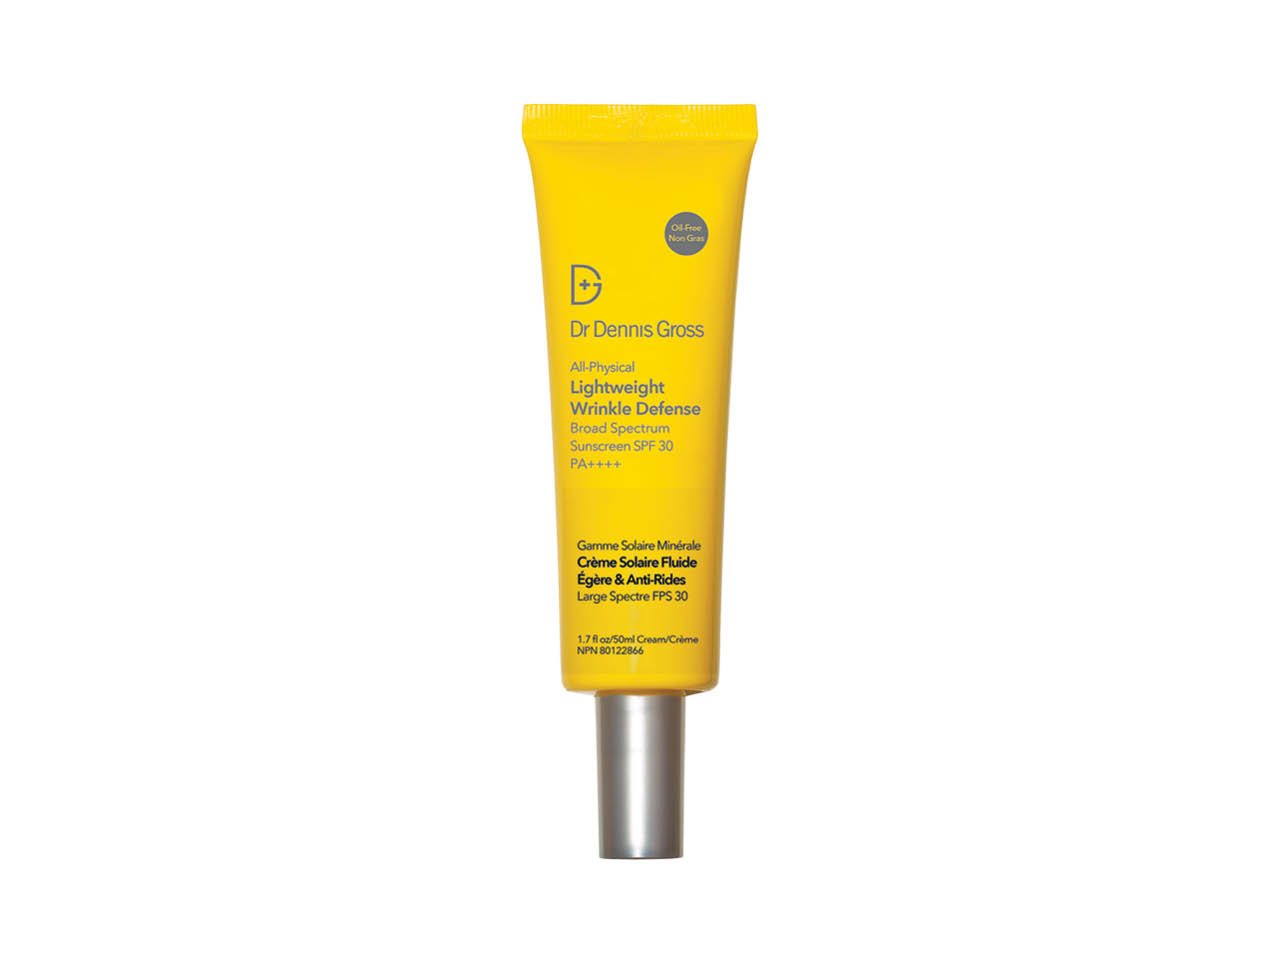 A yellow tube with grey cap of Dr. Dennis Gross All-Physical Lightweight Broad Spectrum Sunscreen SPF 30 sunscreen.